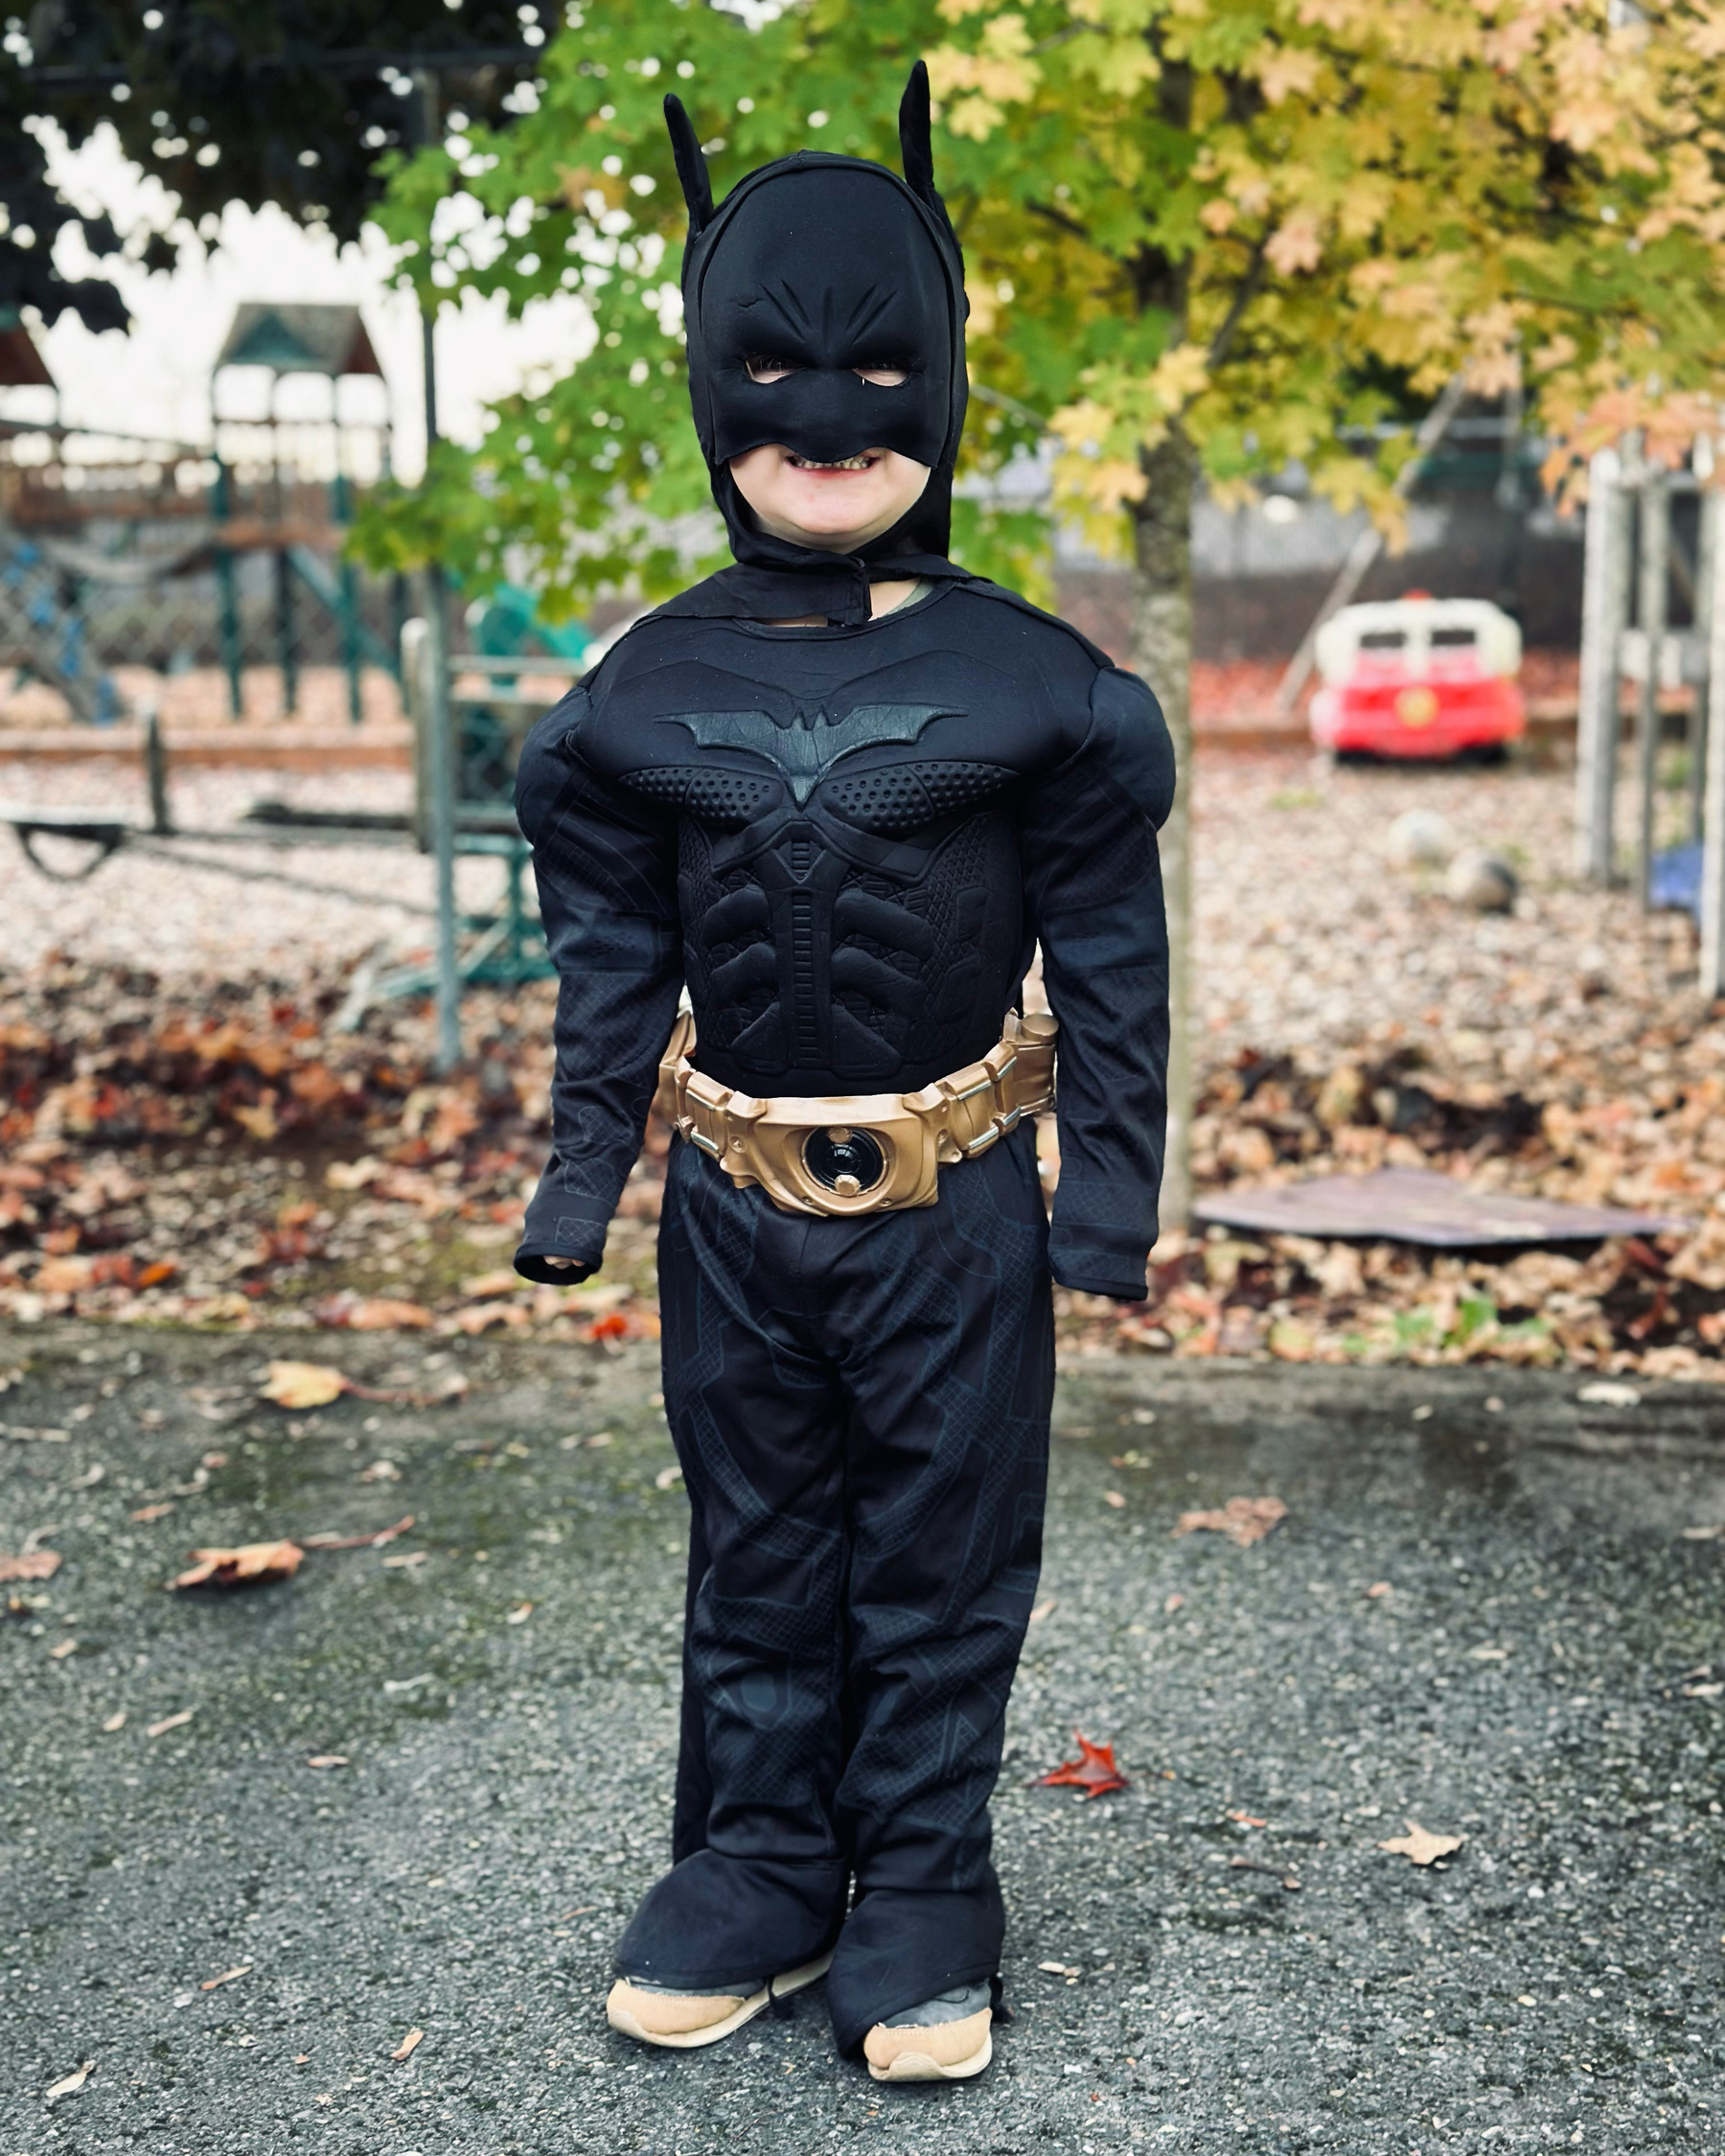 A 4 year old dressed as Batman, about to head into his preschool class. 